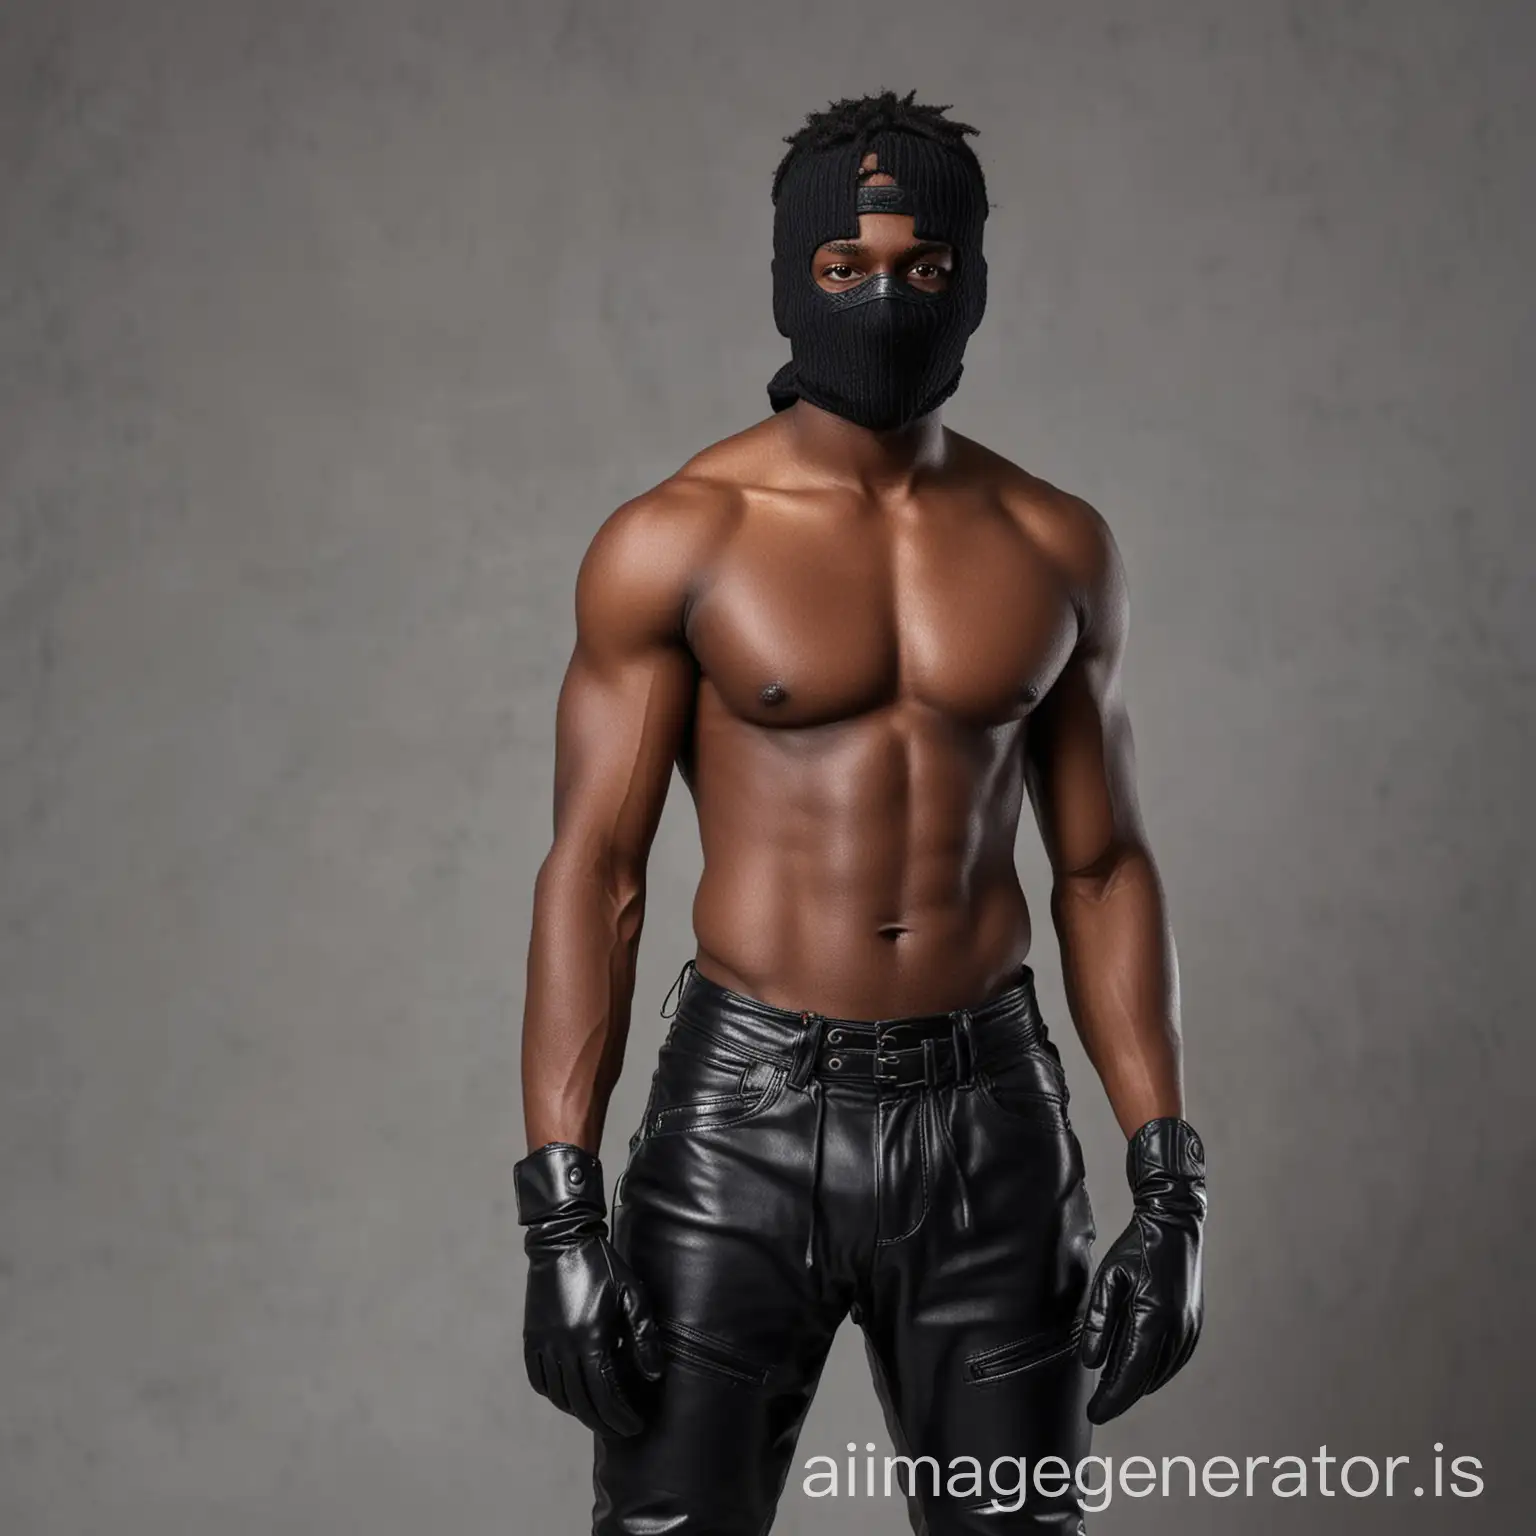 muscular black boy in his 20s wearing black leather clothing, a ski mask and gloves, standing